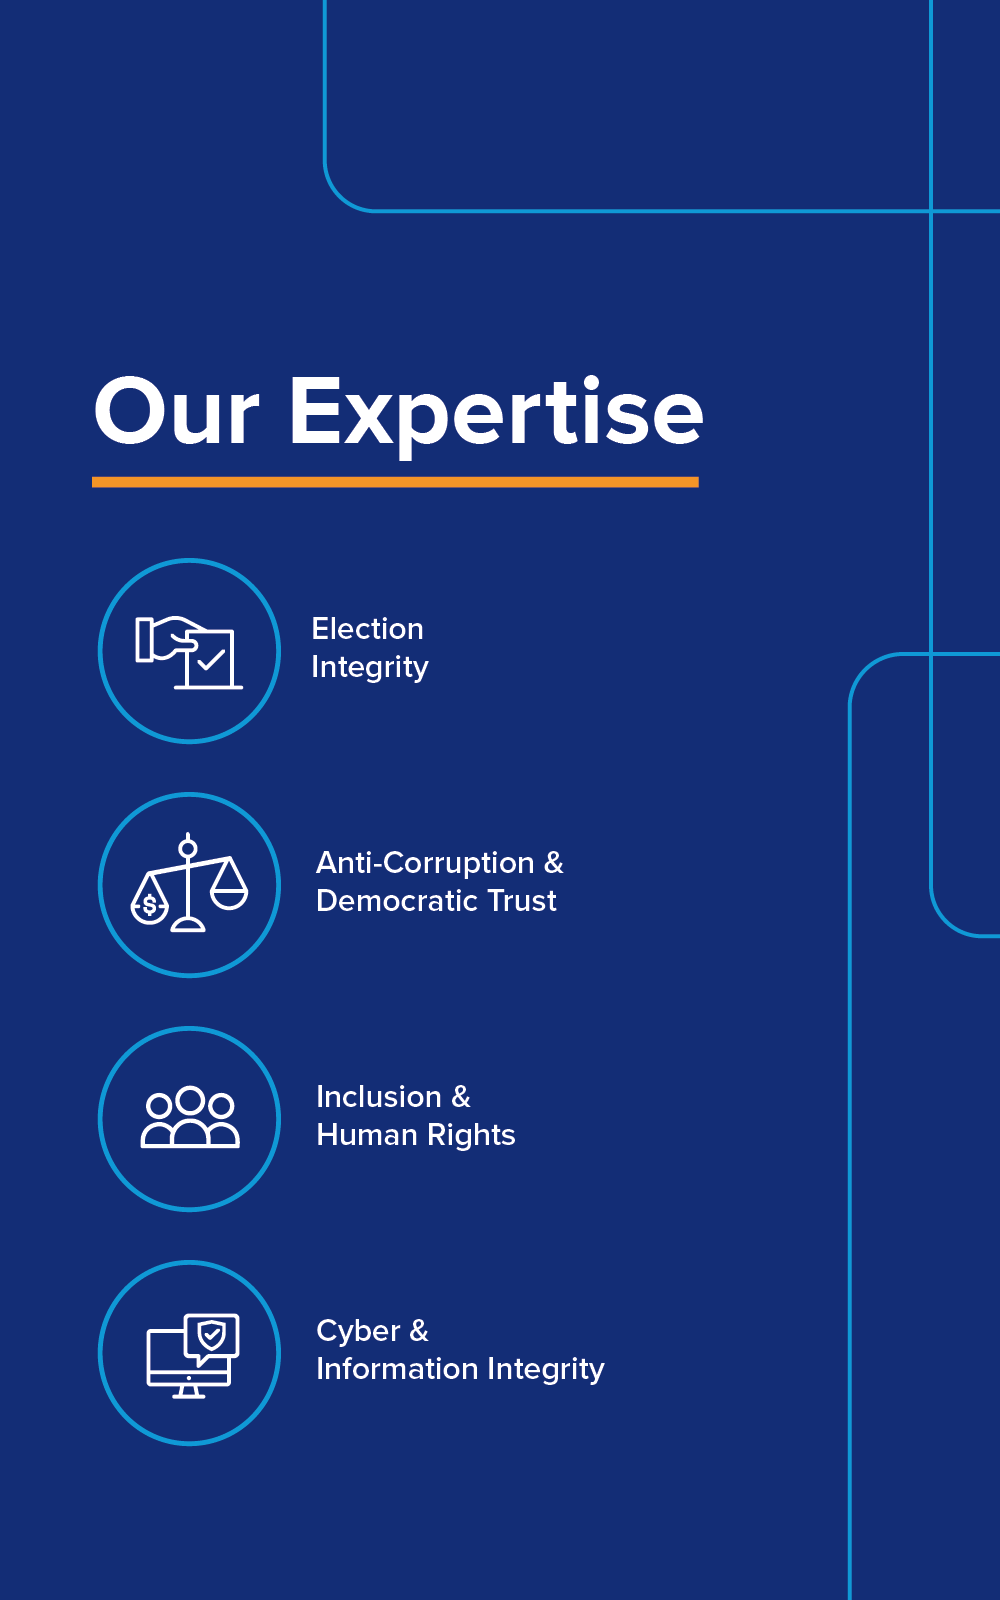 Our Expertise Banner